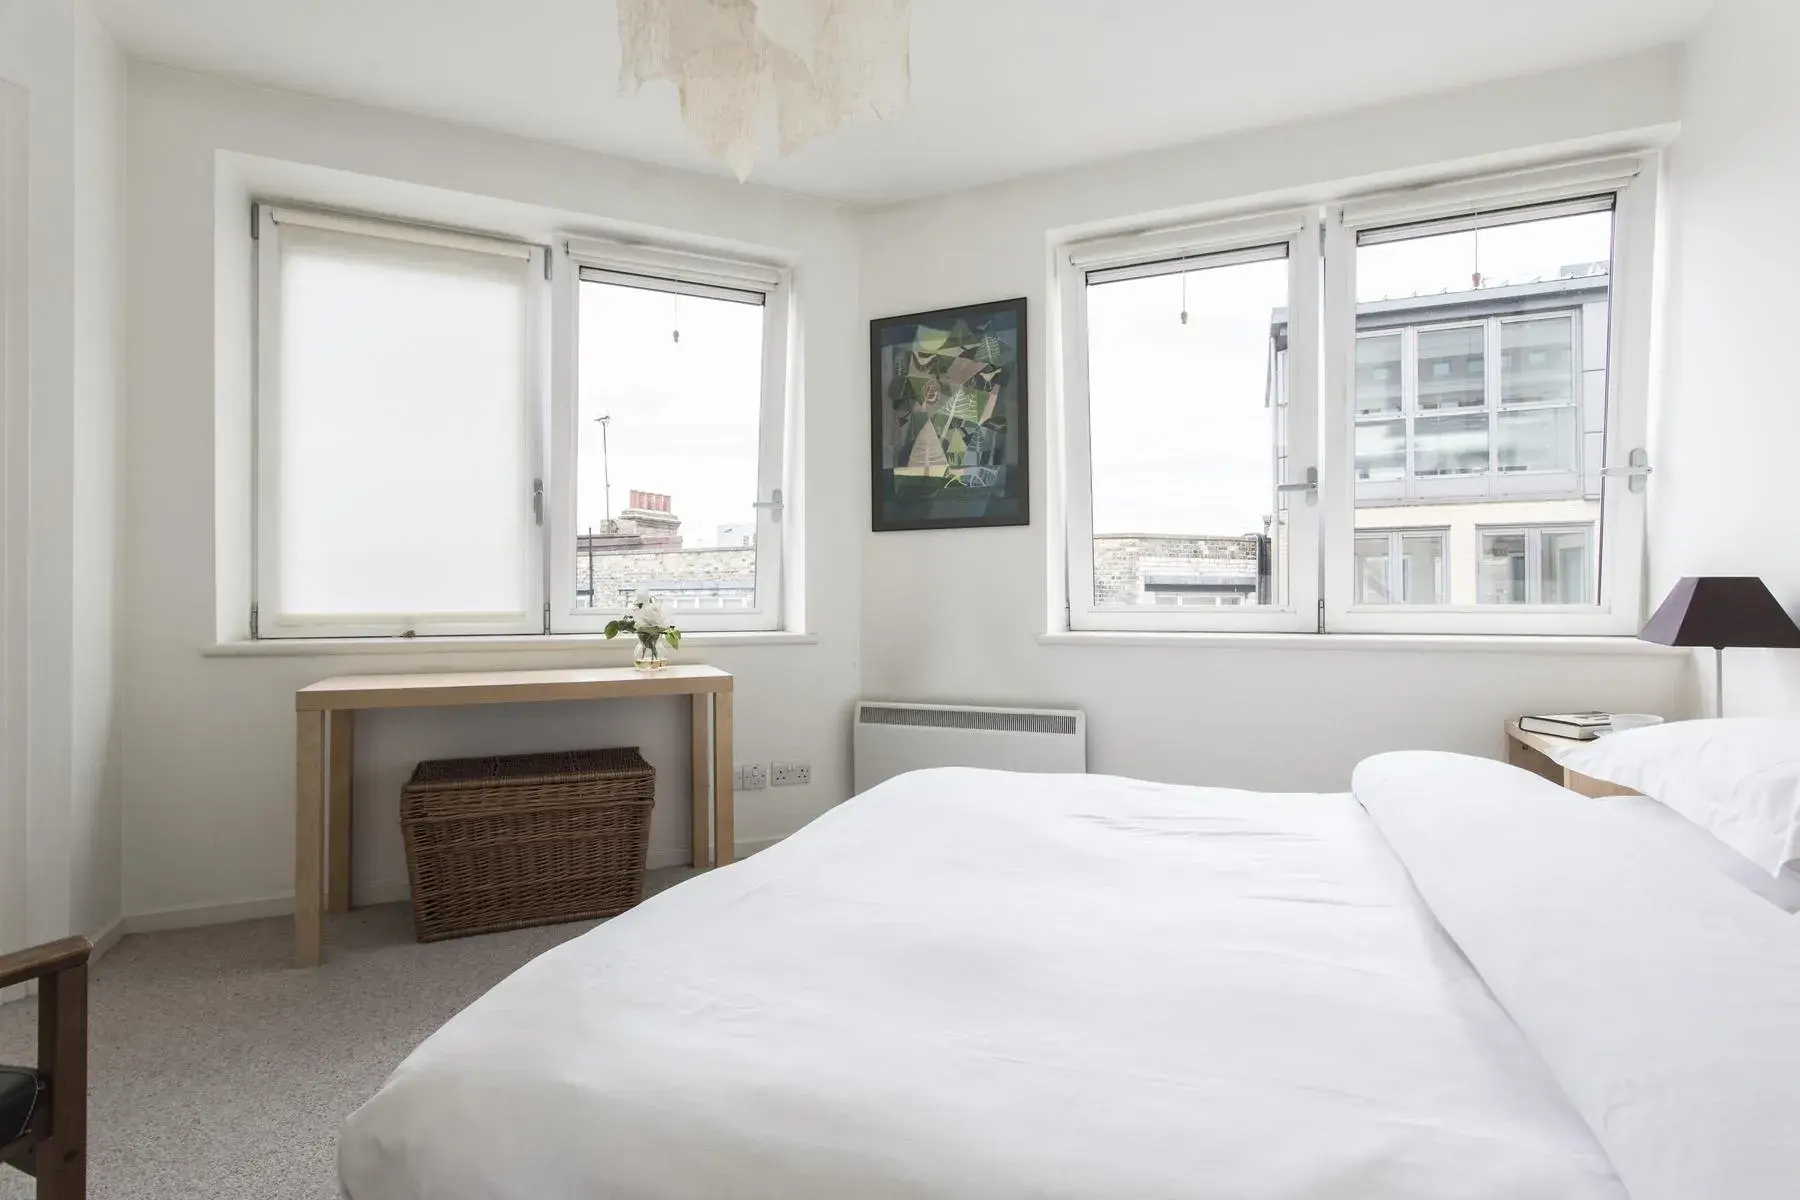 Lambs Conduit Street, holiday home in Holborn, London